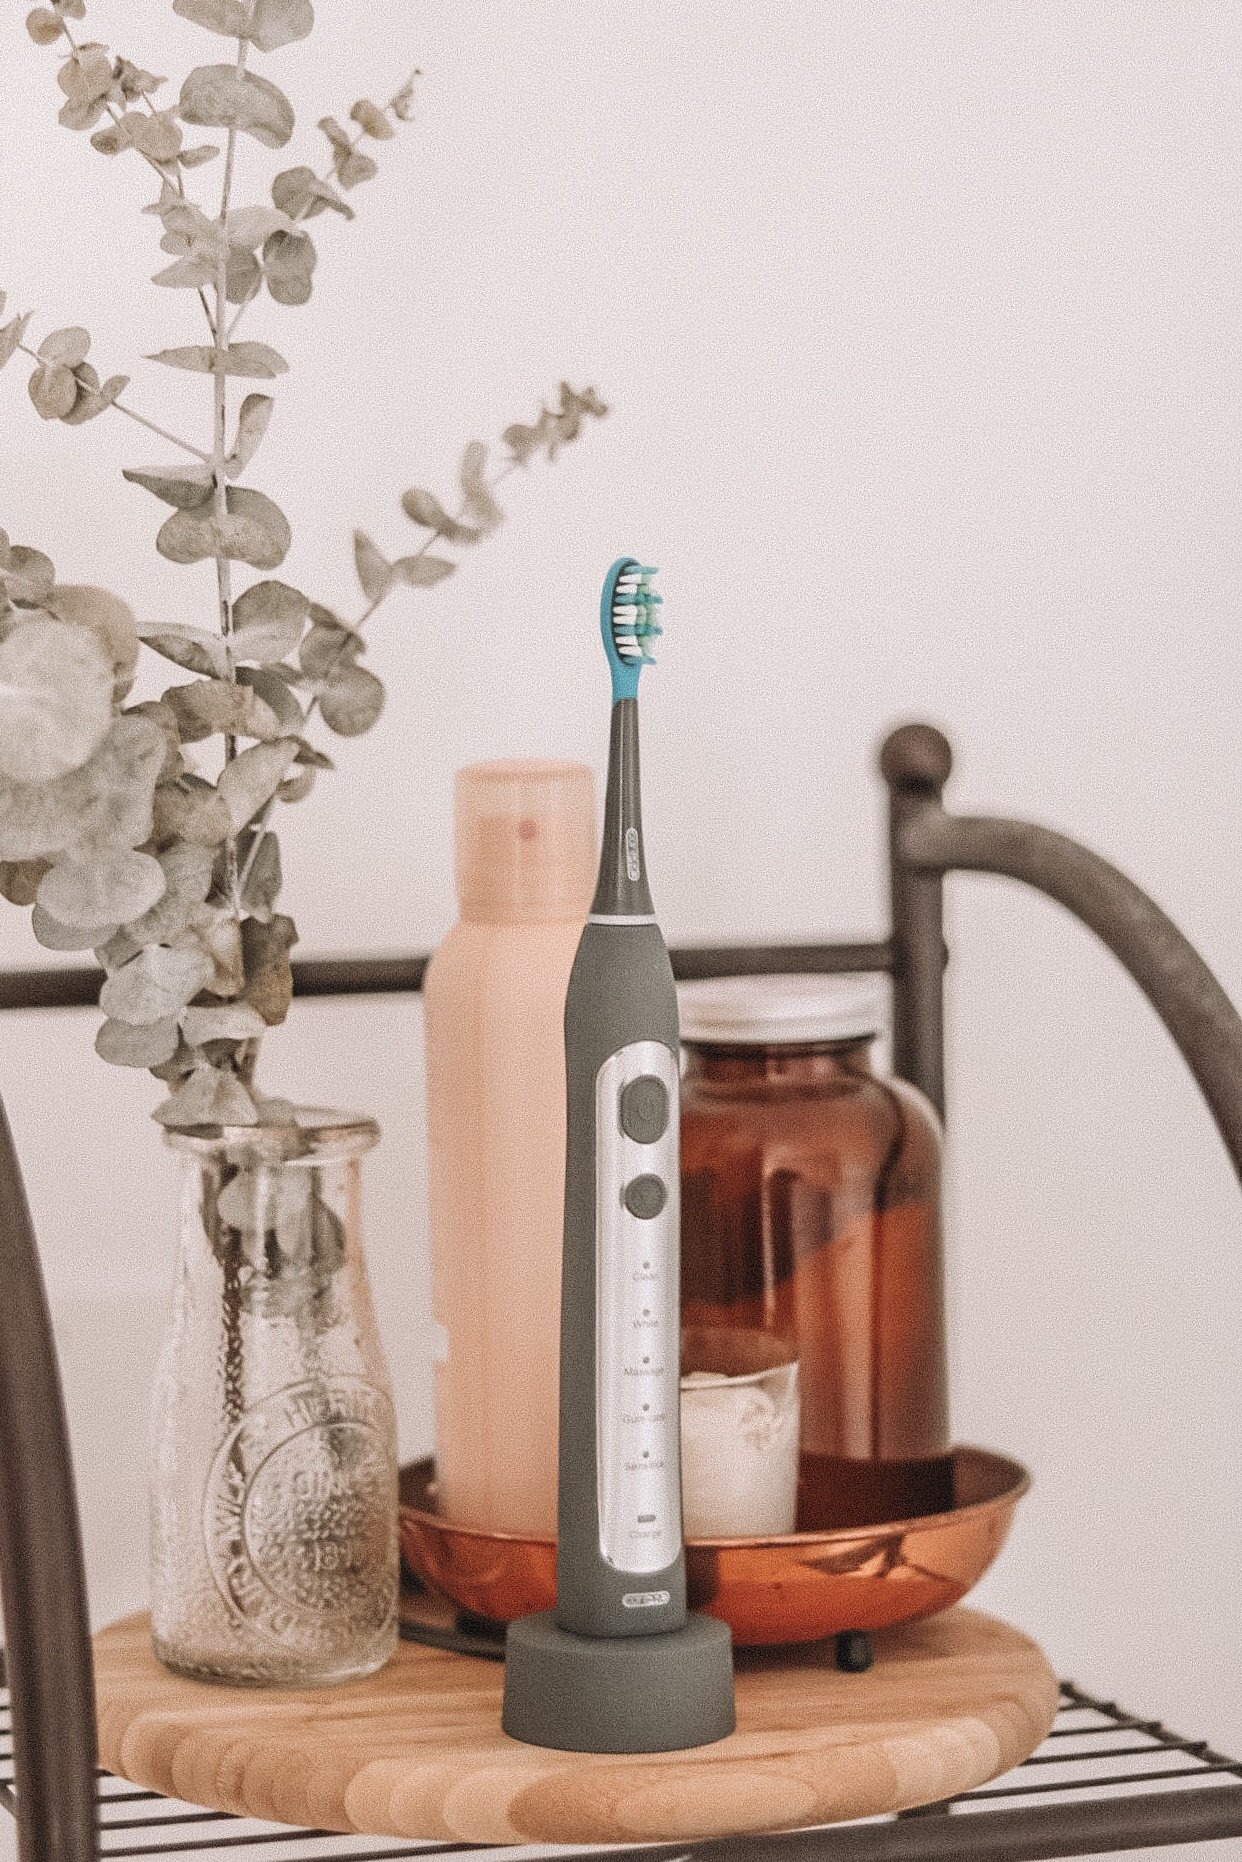 CariPro Ultrasonic Toothbrush Collab + Giveaway